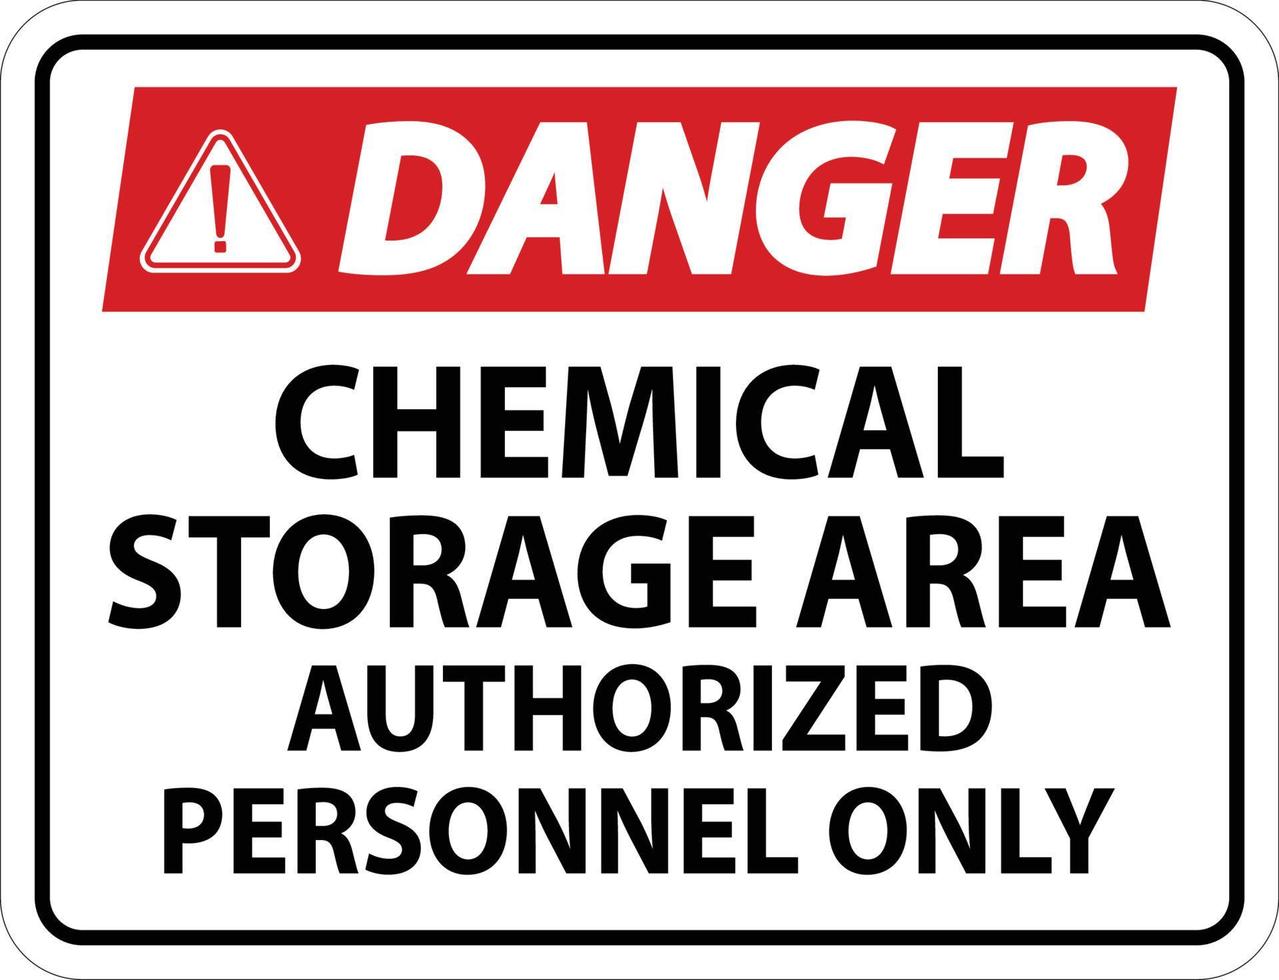 Danger Chemical Storage Area Authorized Personnel Only Symbol Sign vector